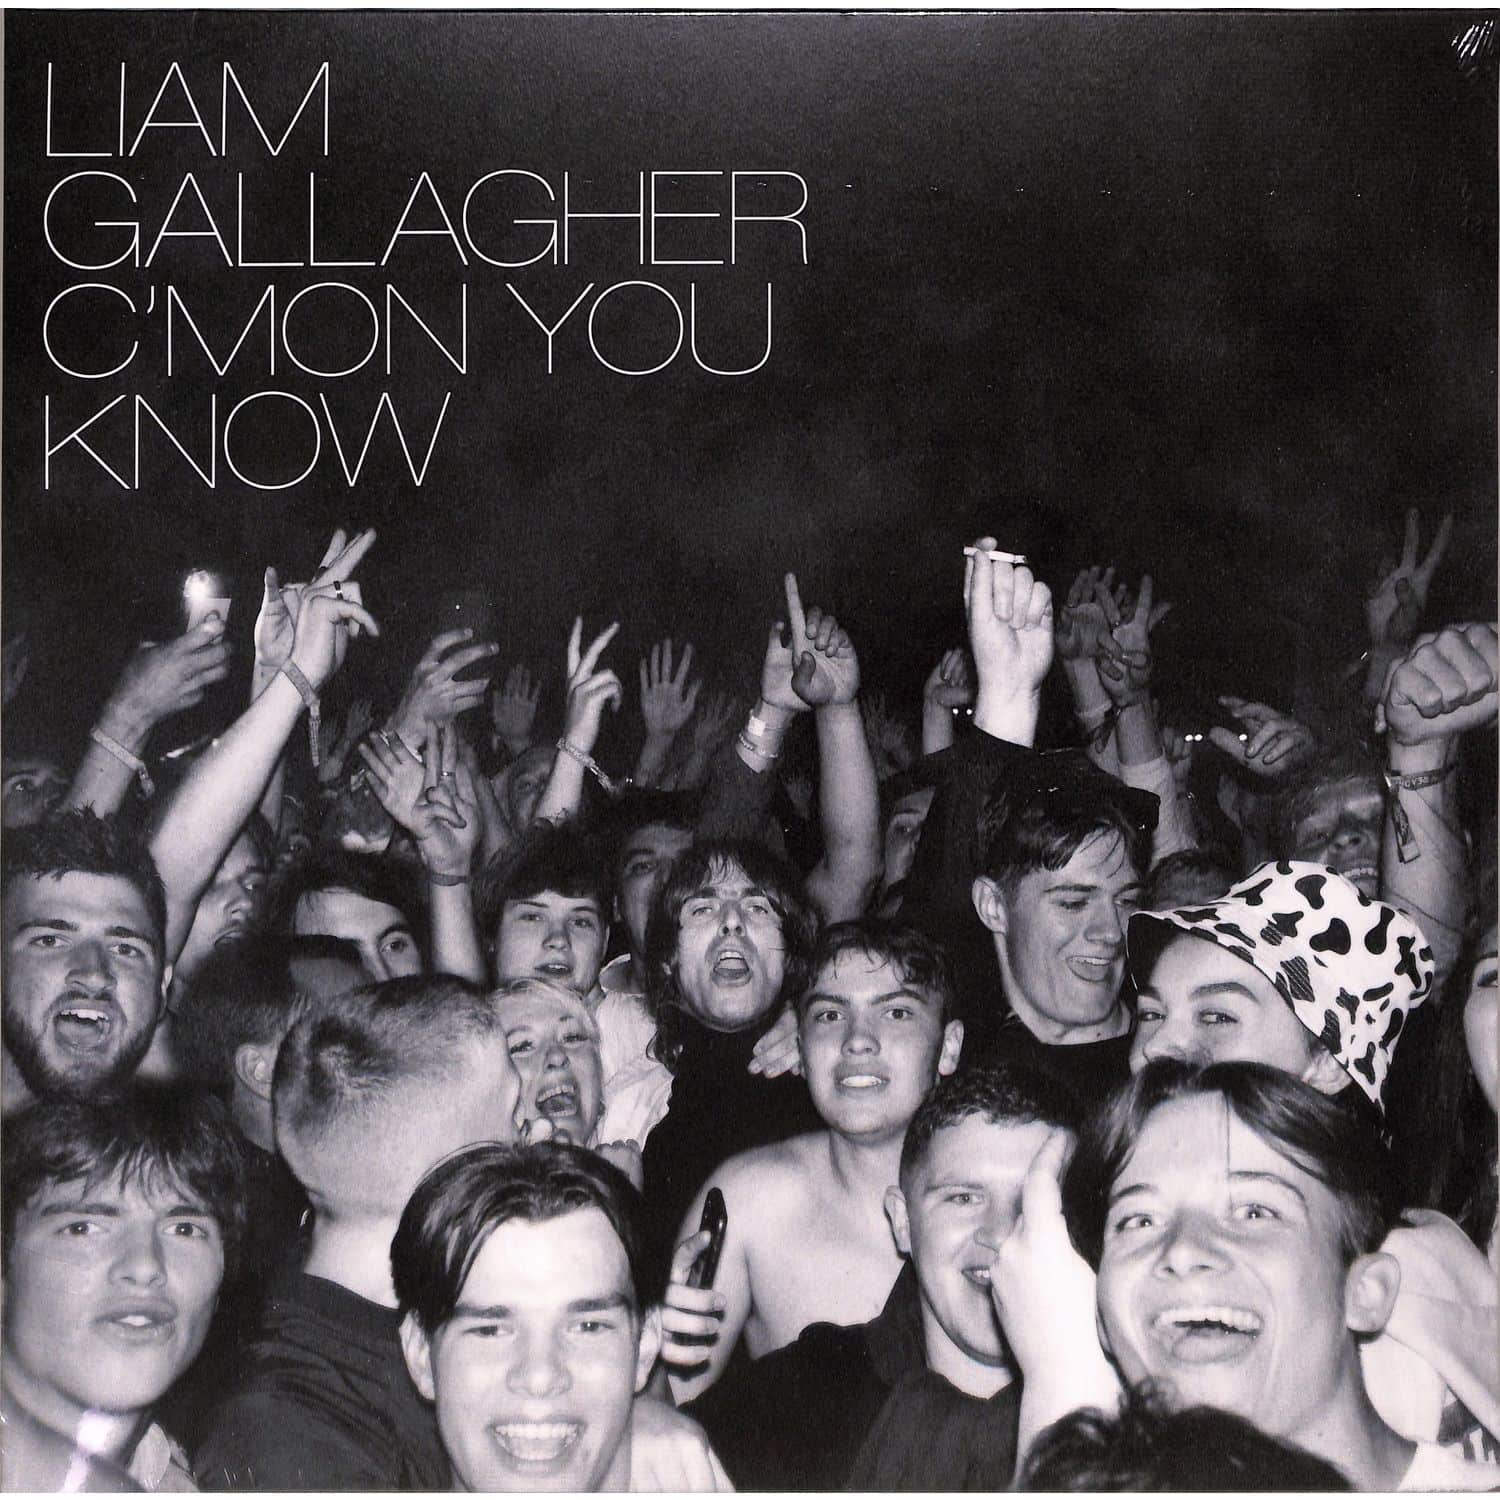 Liam Gallagher - CMON YOU KNOW 